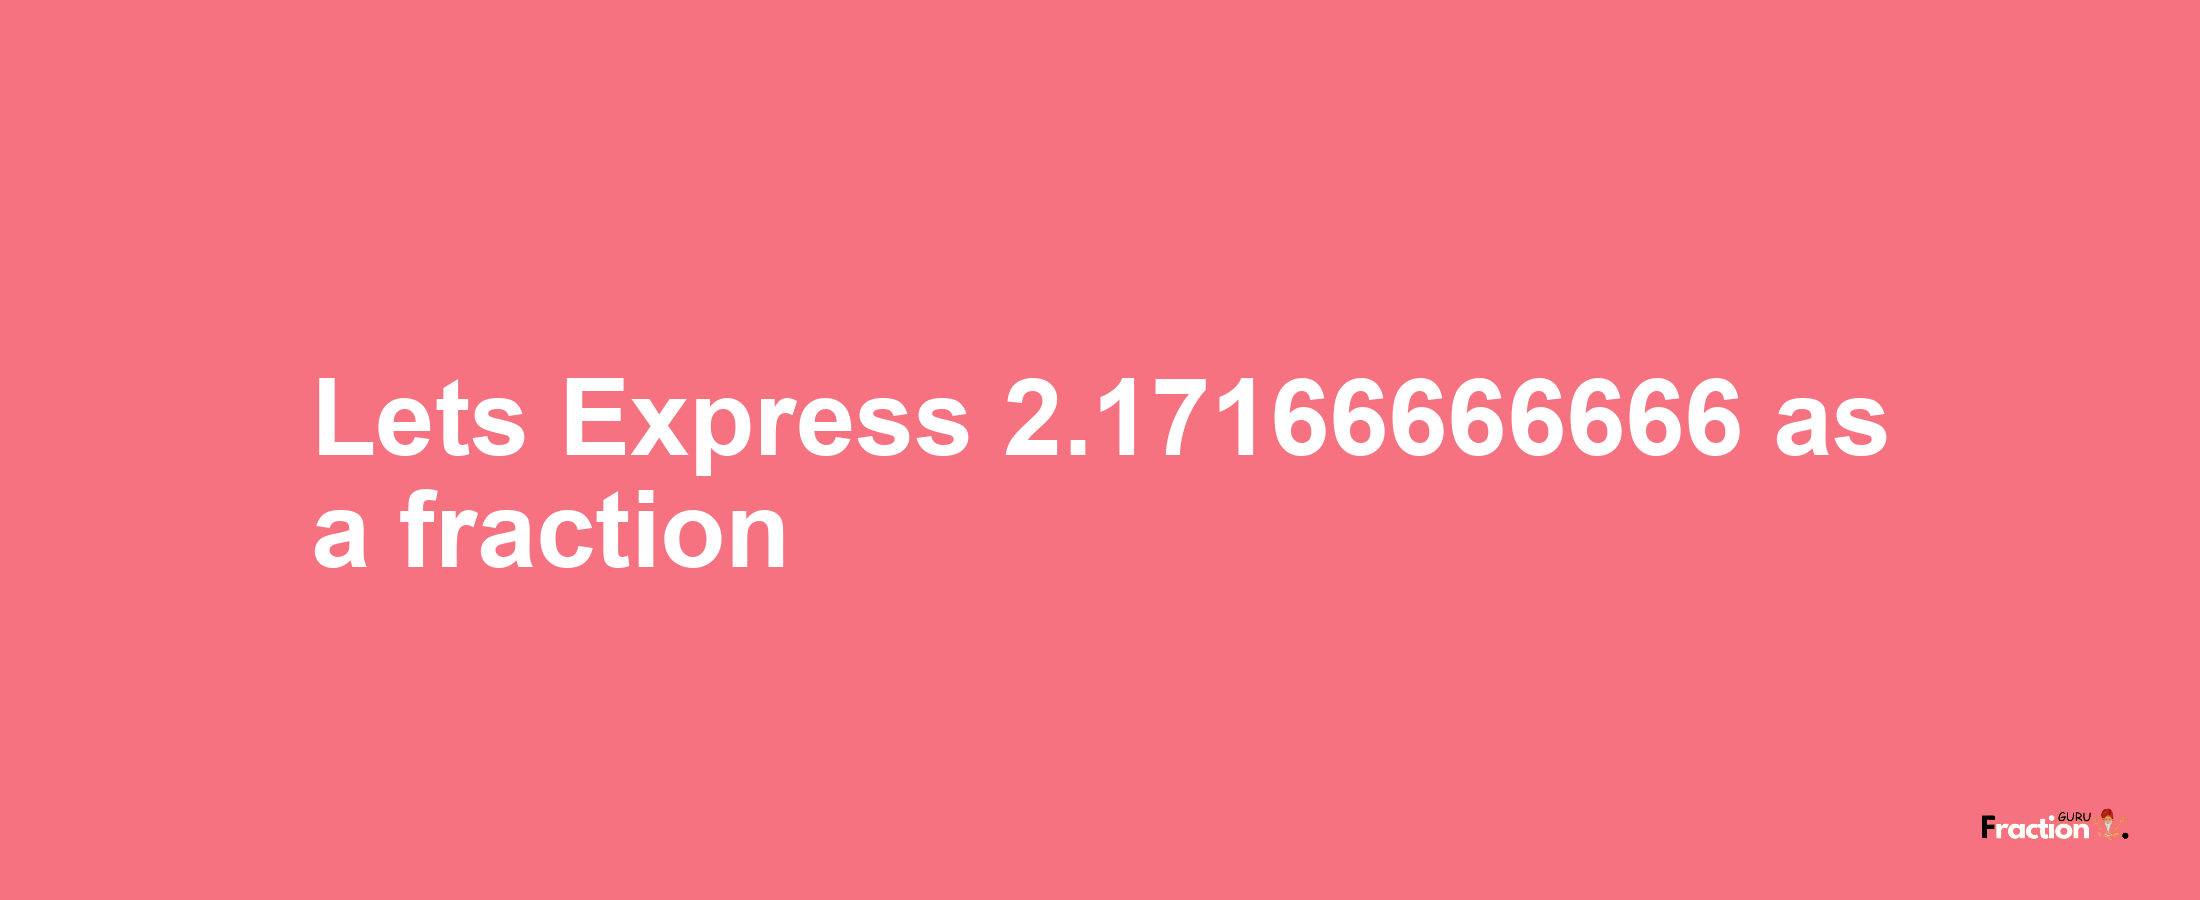 Lets Express 2.17166666666 as afraction